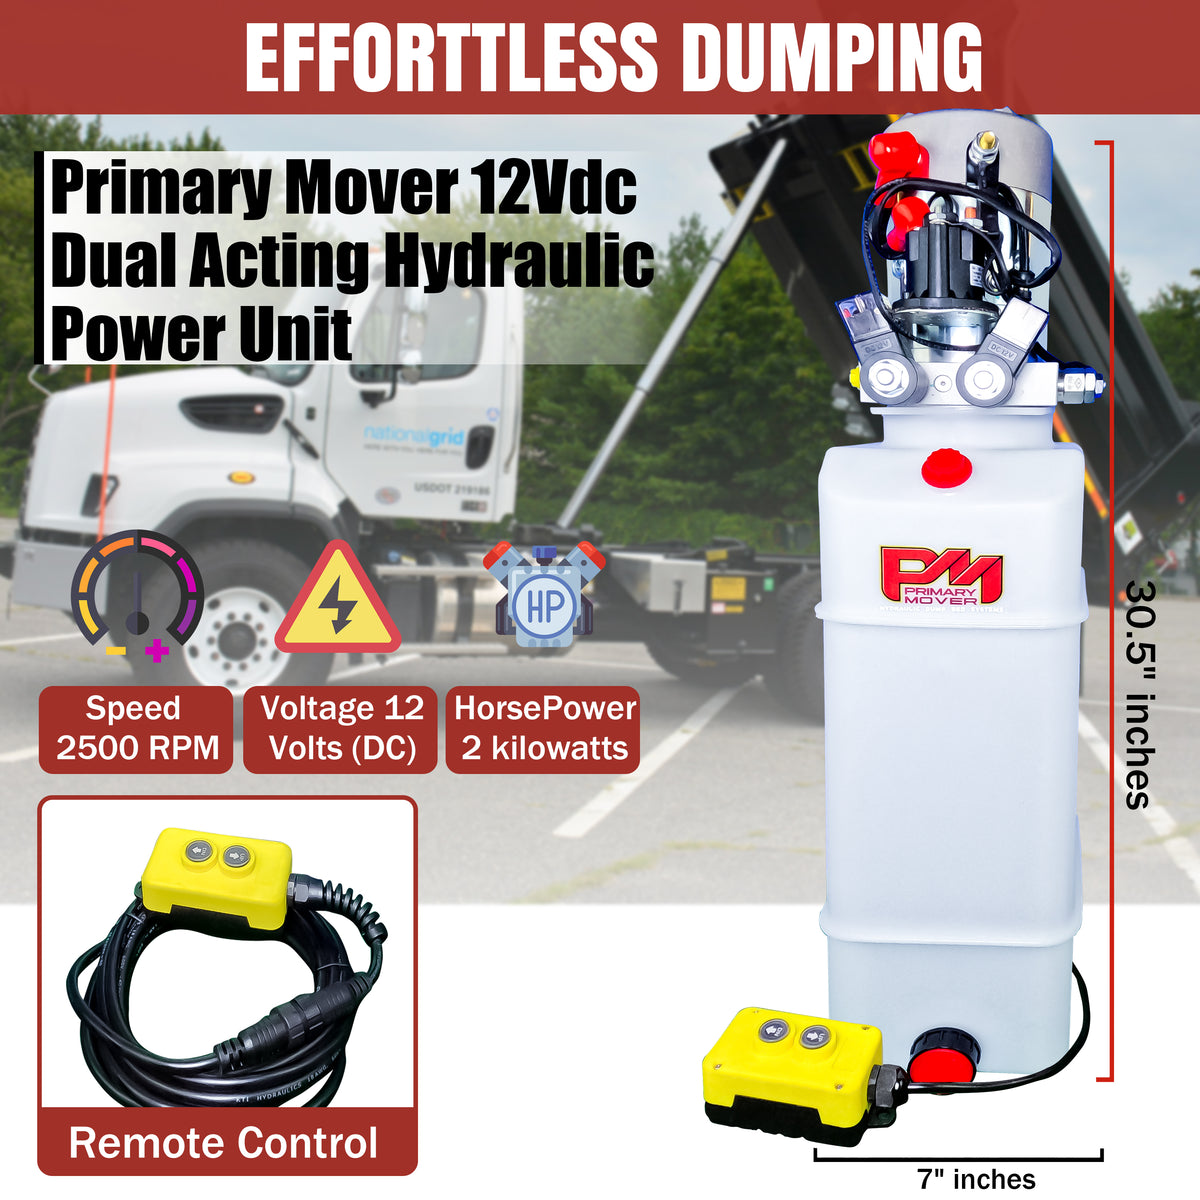 Primary Mover 12V Double-Acting Hydraulic Pump - Precision-engineered for hydraulic dump bed systems. Dual-acting functionality, quality craftsmanship, and cost-effective performance.